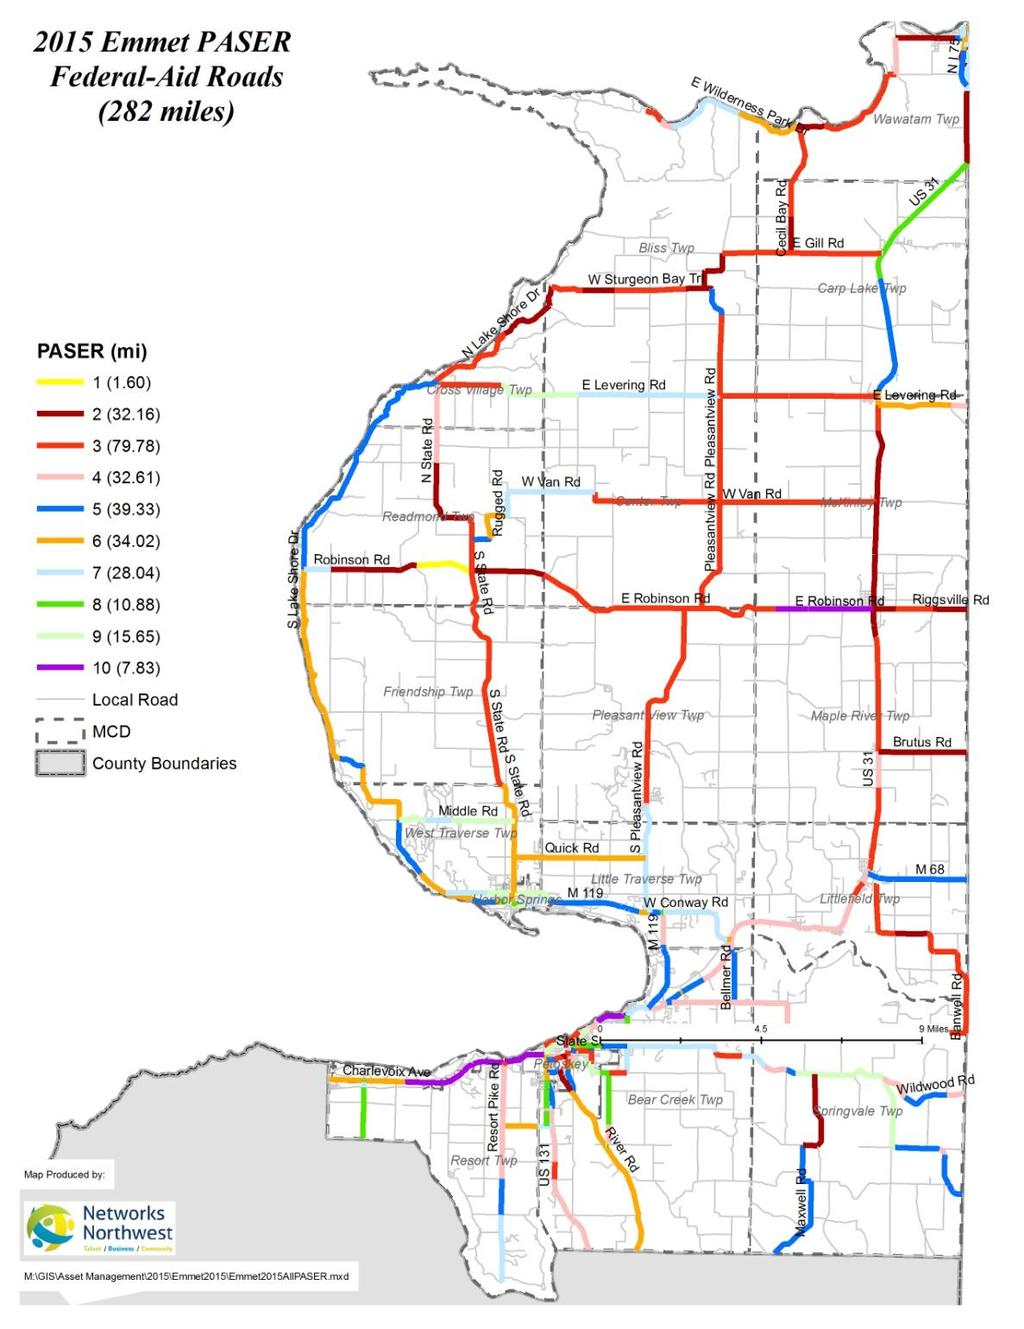 Emmet County Data was collected on approximately 282 miles of federal-aid roads in Emmet County July 14 July 15.